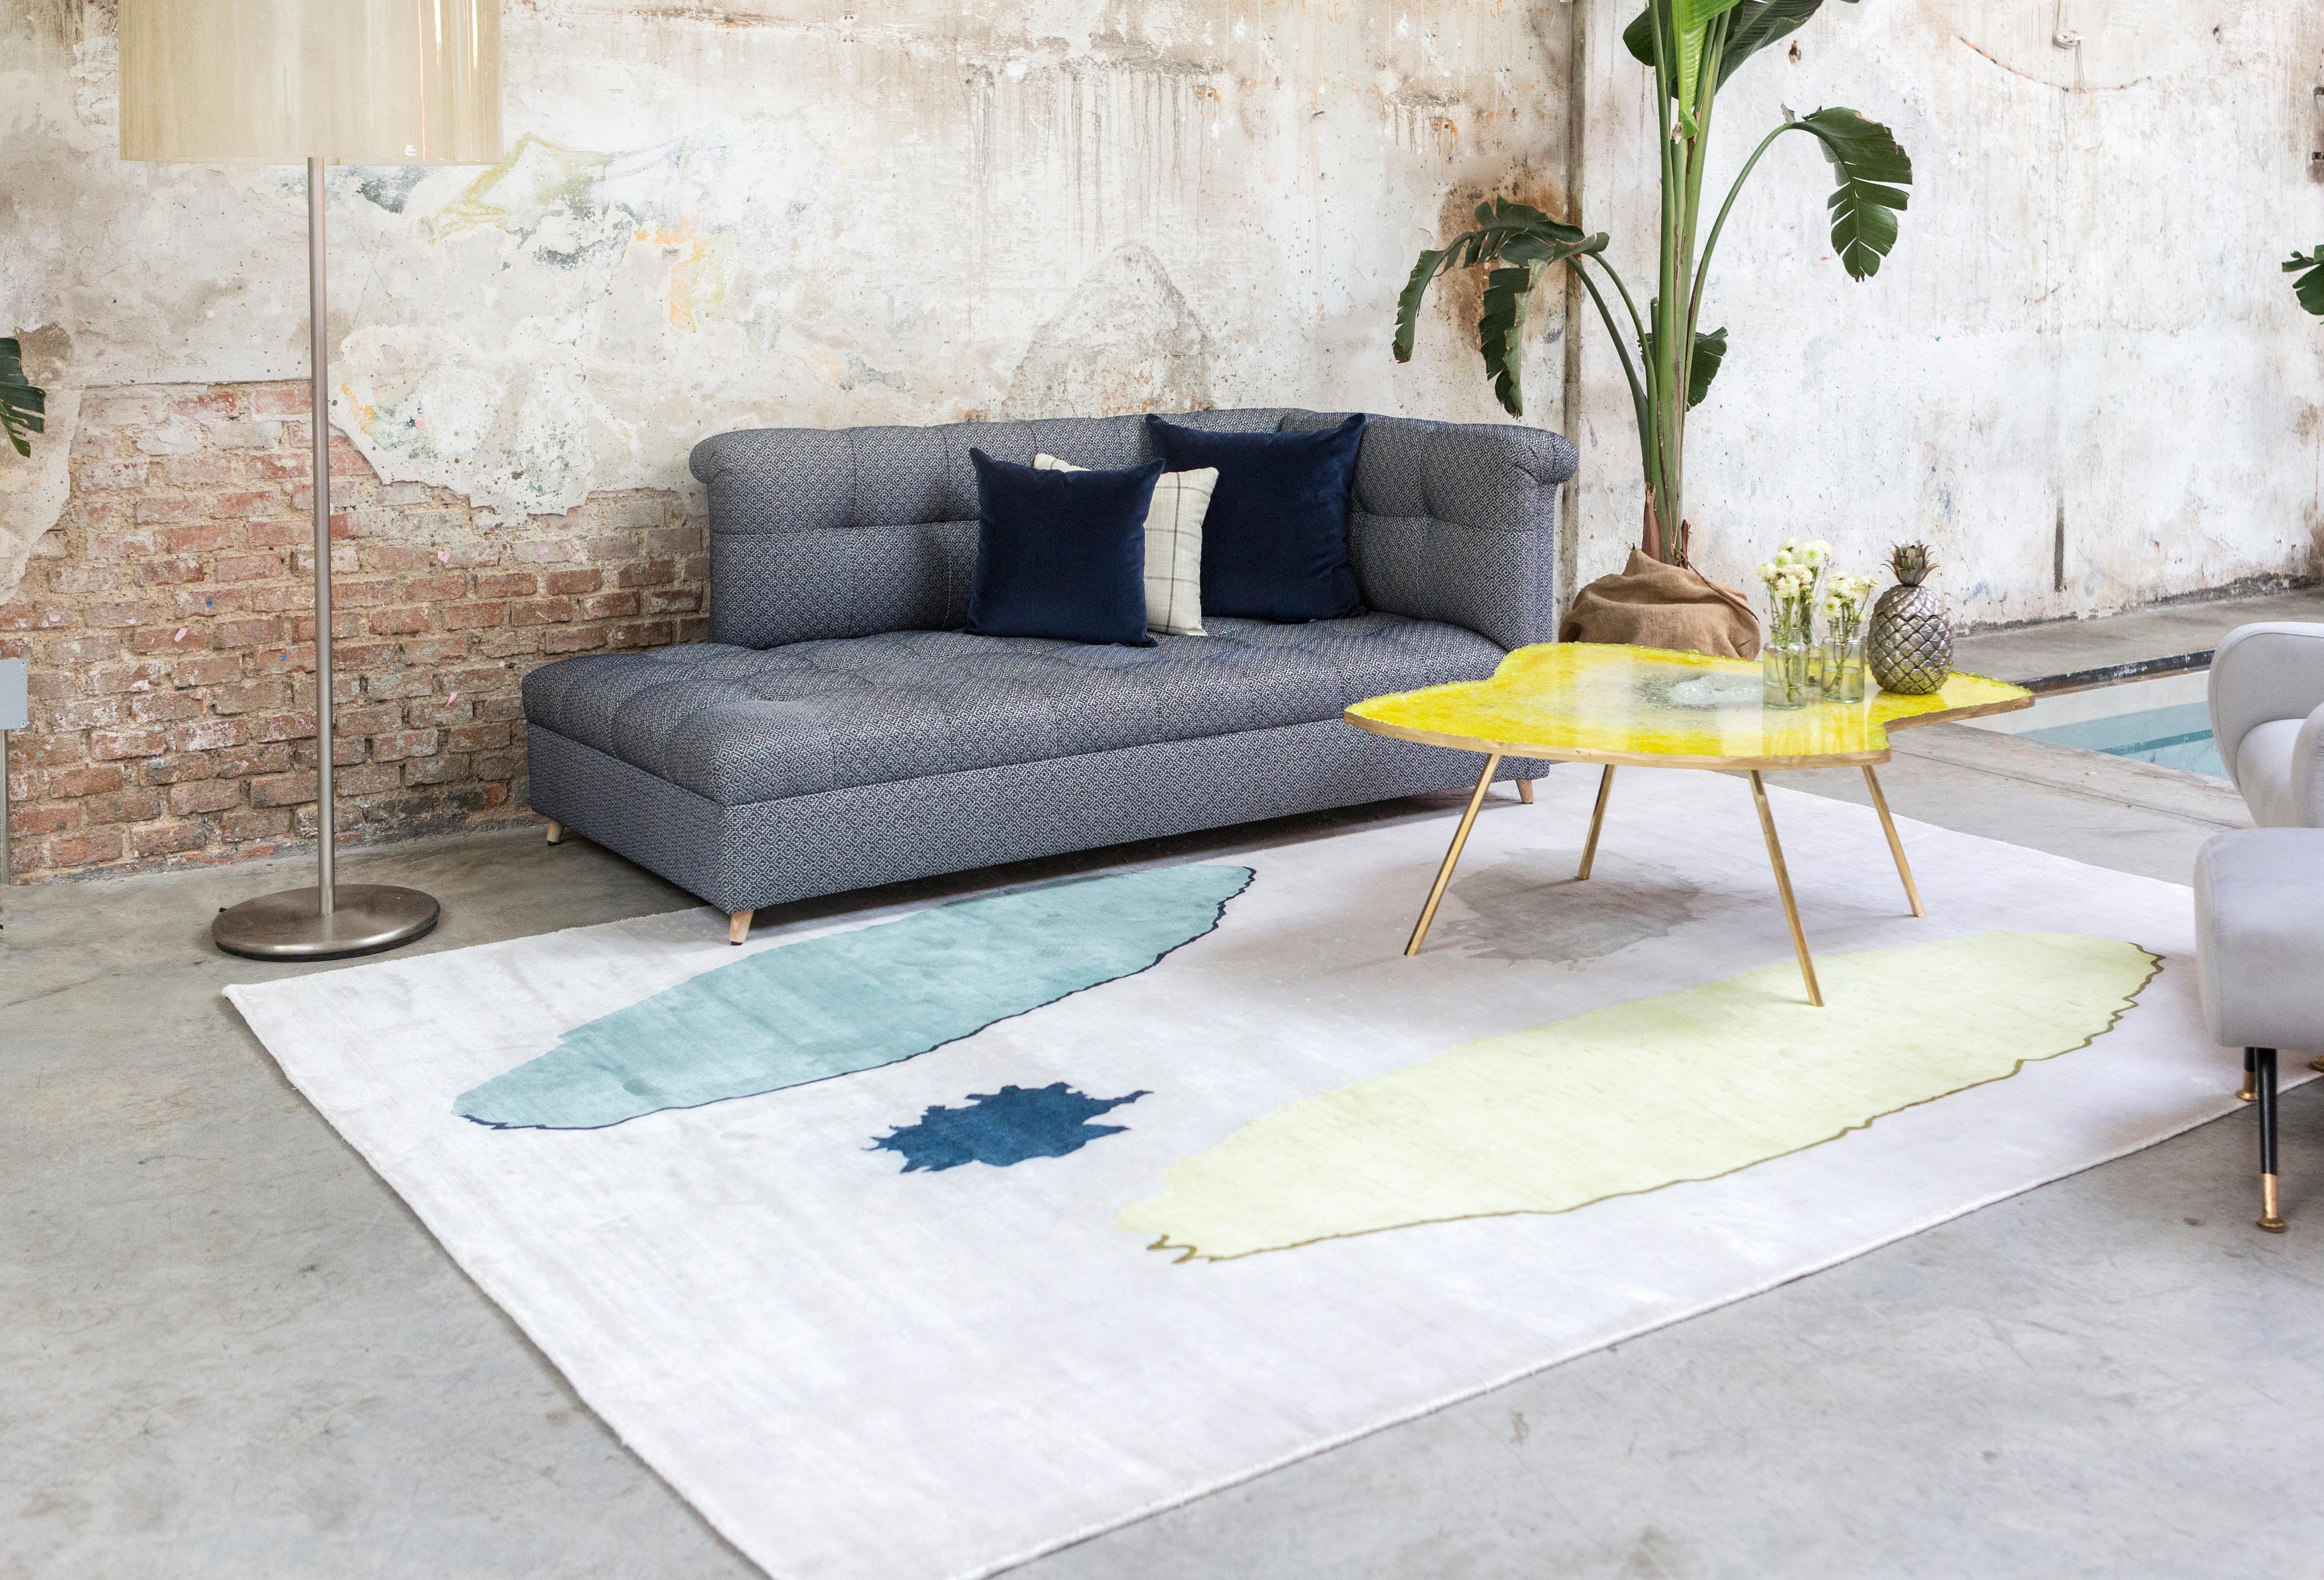 This rug has been designed by Chío León, Spanish fabric designer who has collaborated with multiple international brands specialized in fashion and interior design.

Is handloomed and printed in Northern India.
We use only the finest yarns, 100%